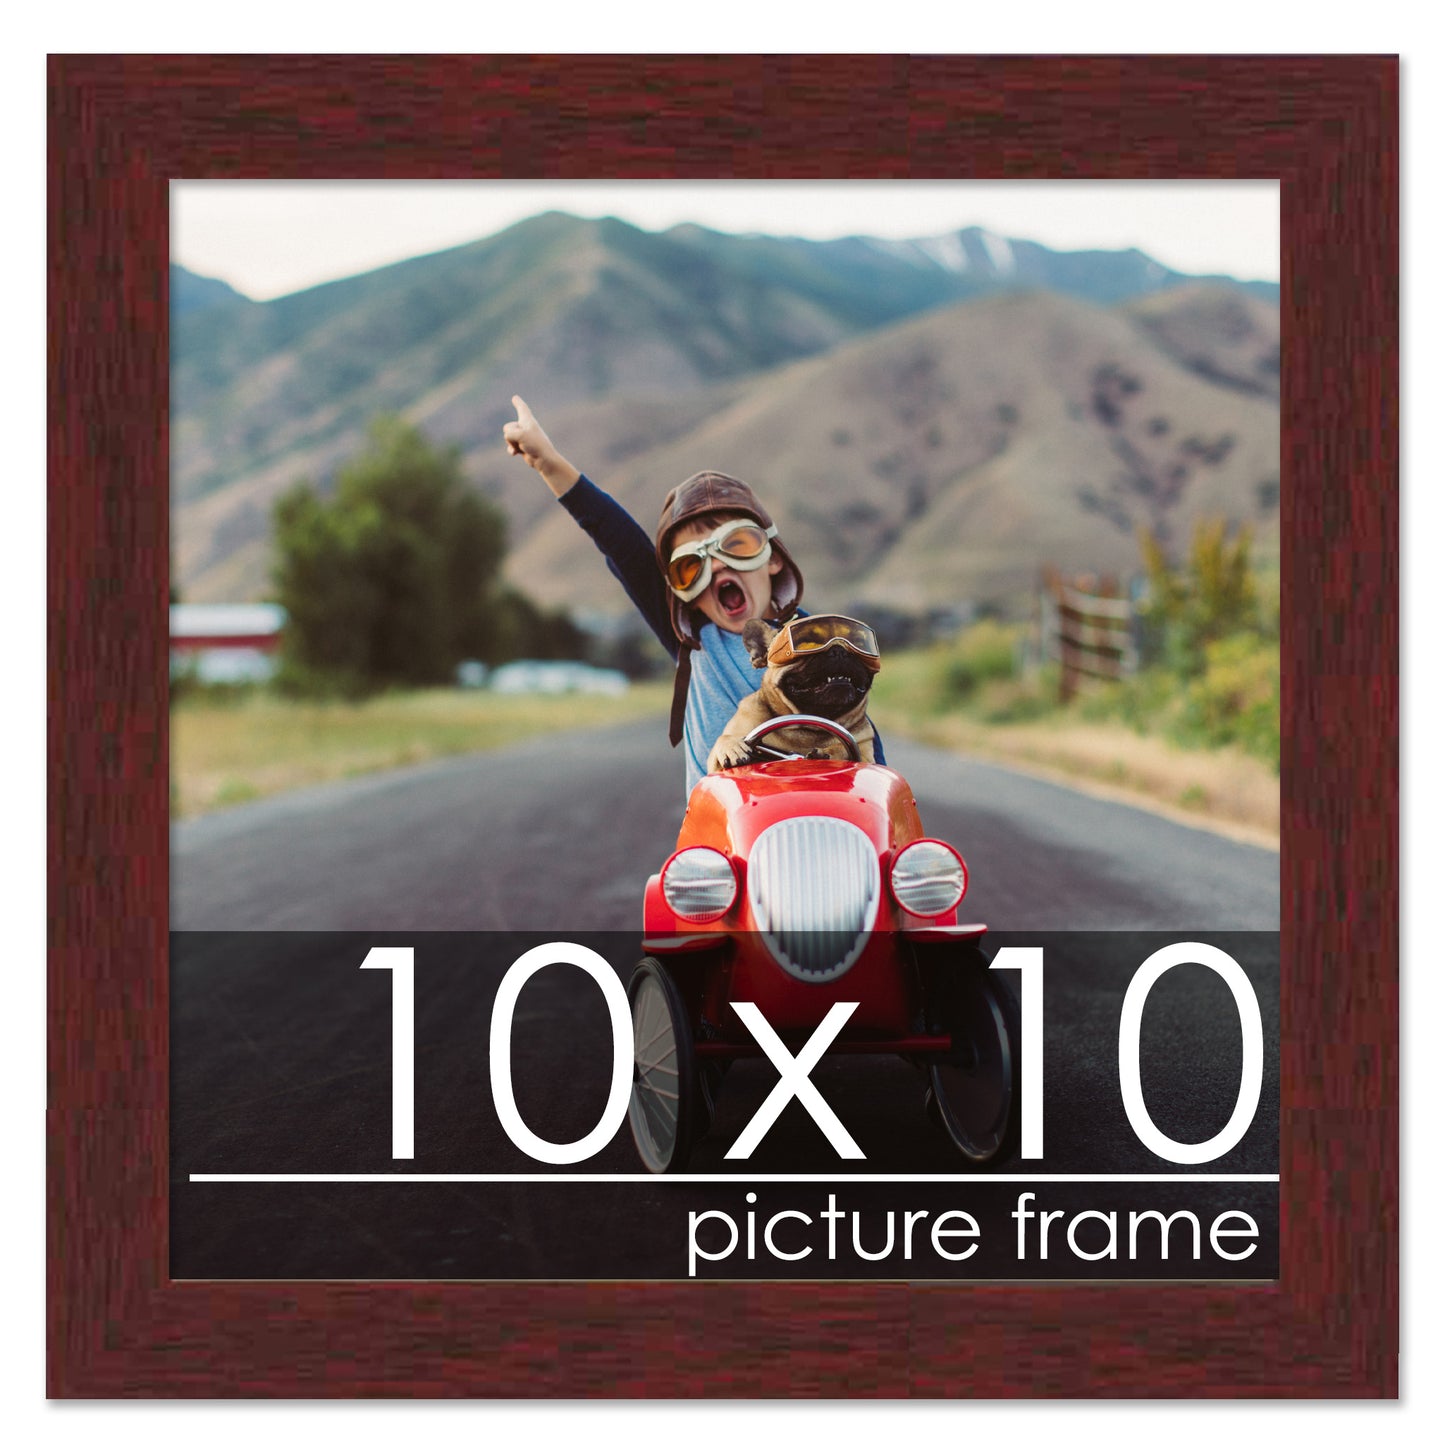 Traditional Walnut Wood Picture Frame